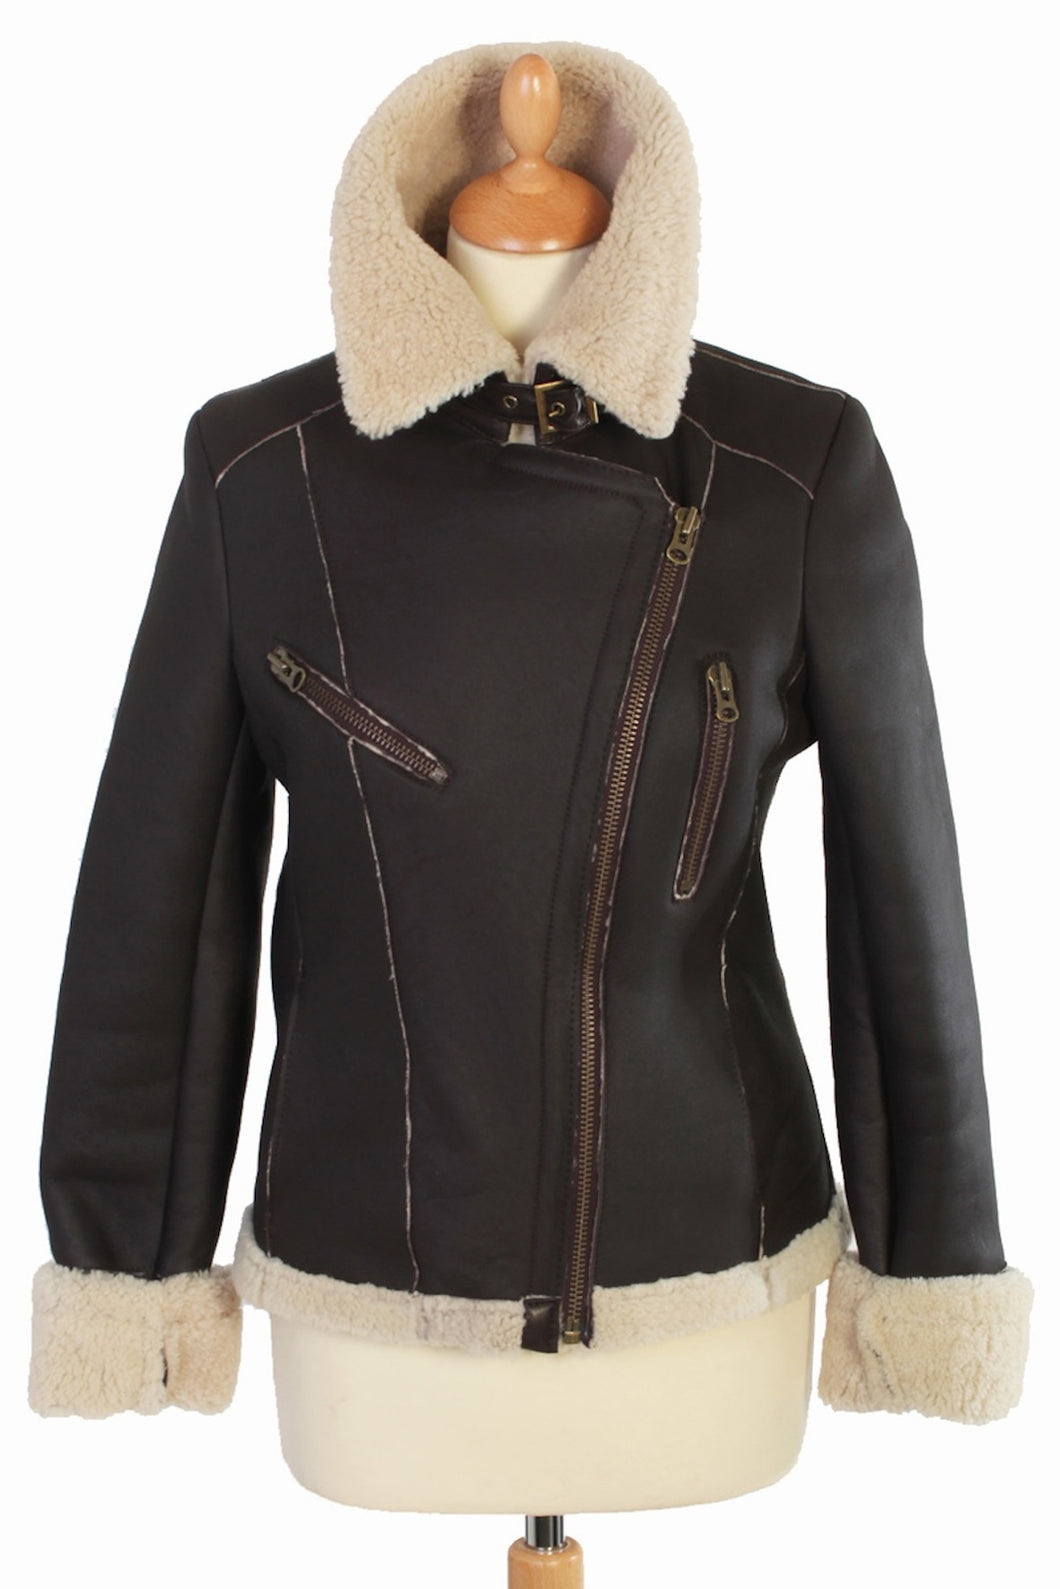 Aviator style Jacket in top quality leather with sheepskin inner